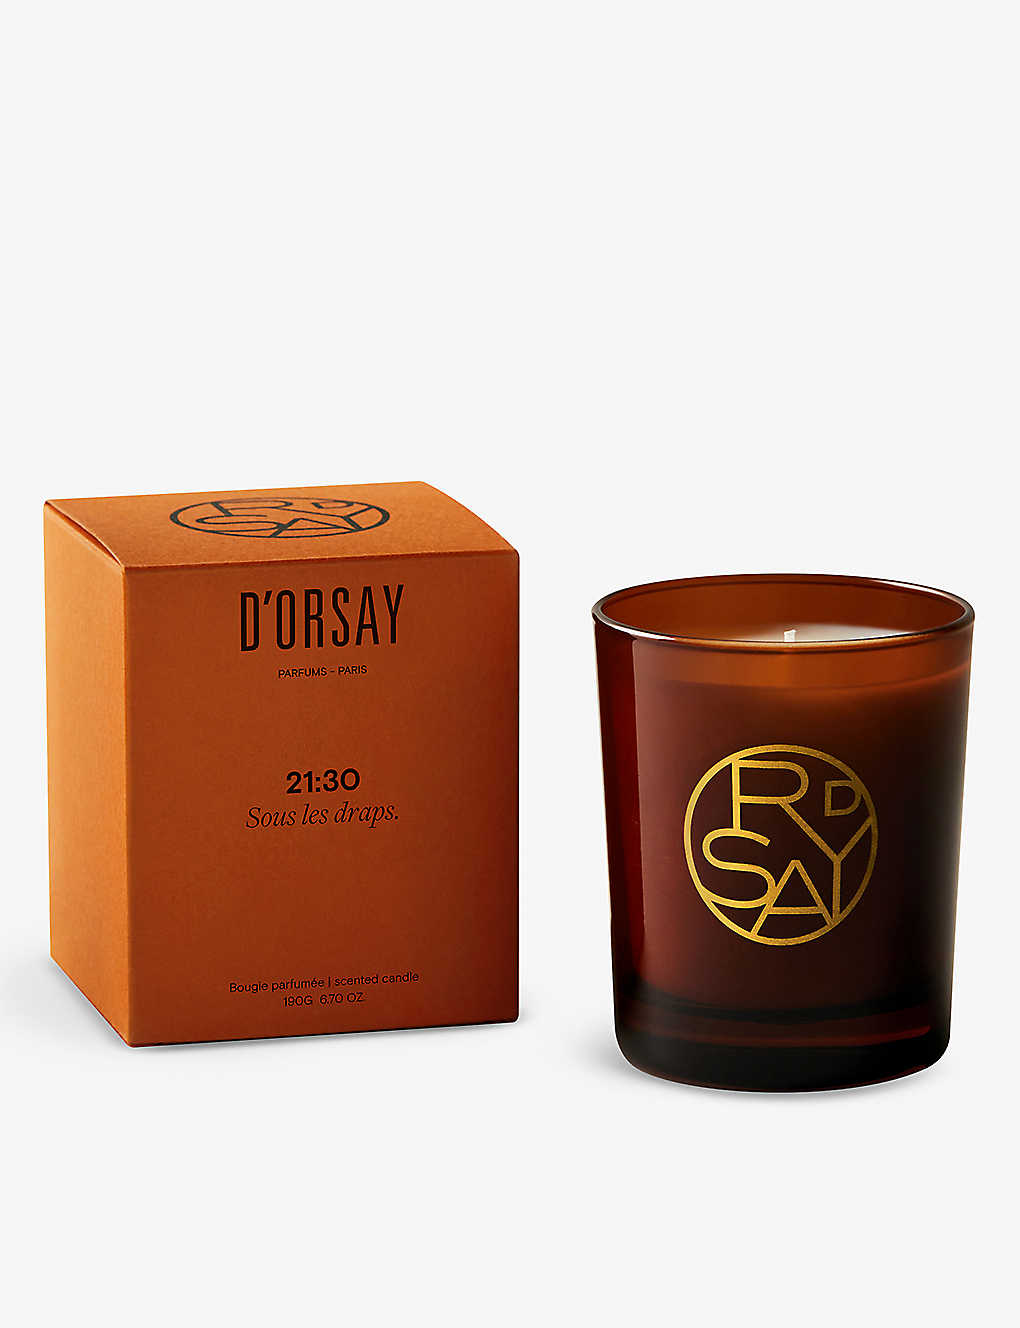 D'orsay 21:30 Scented Candle 190g